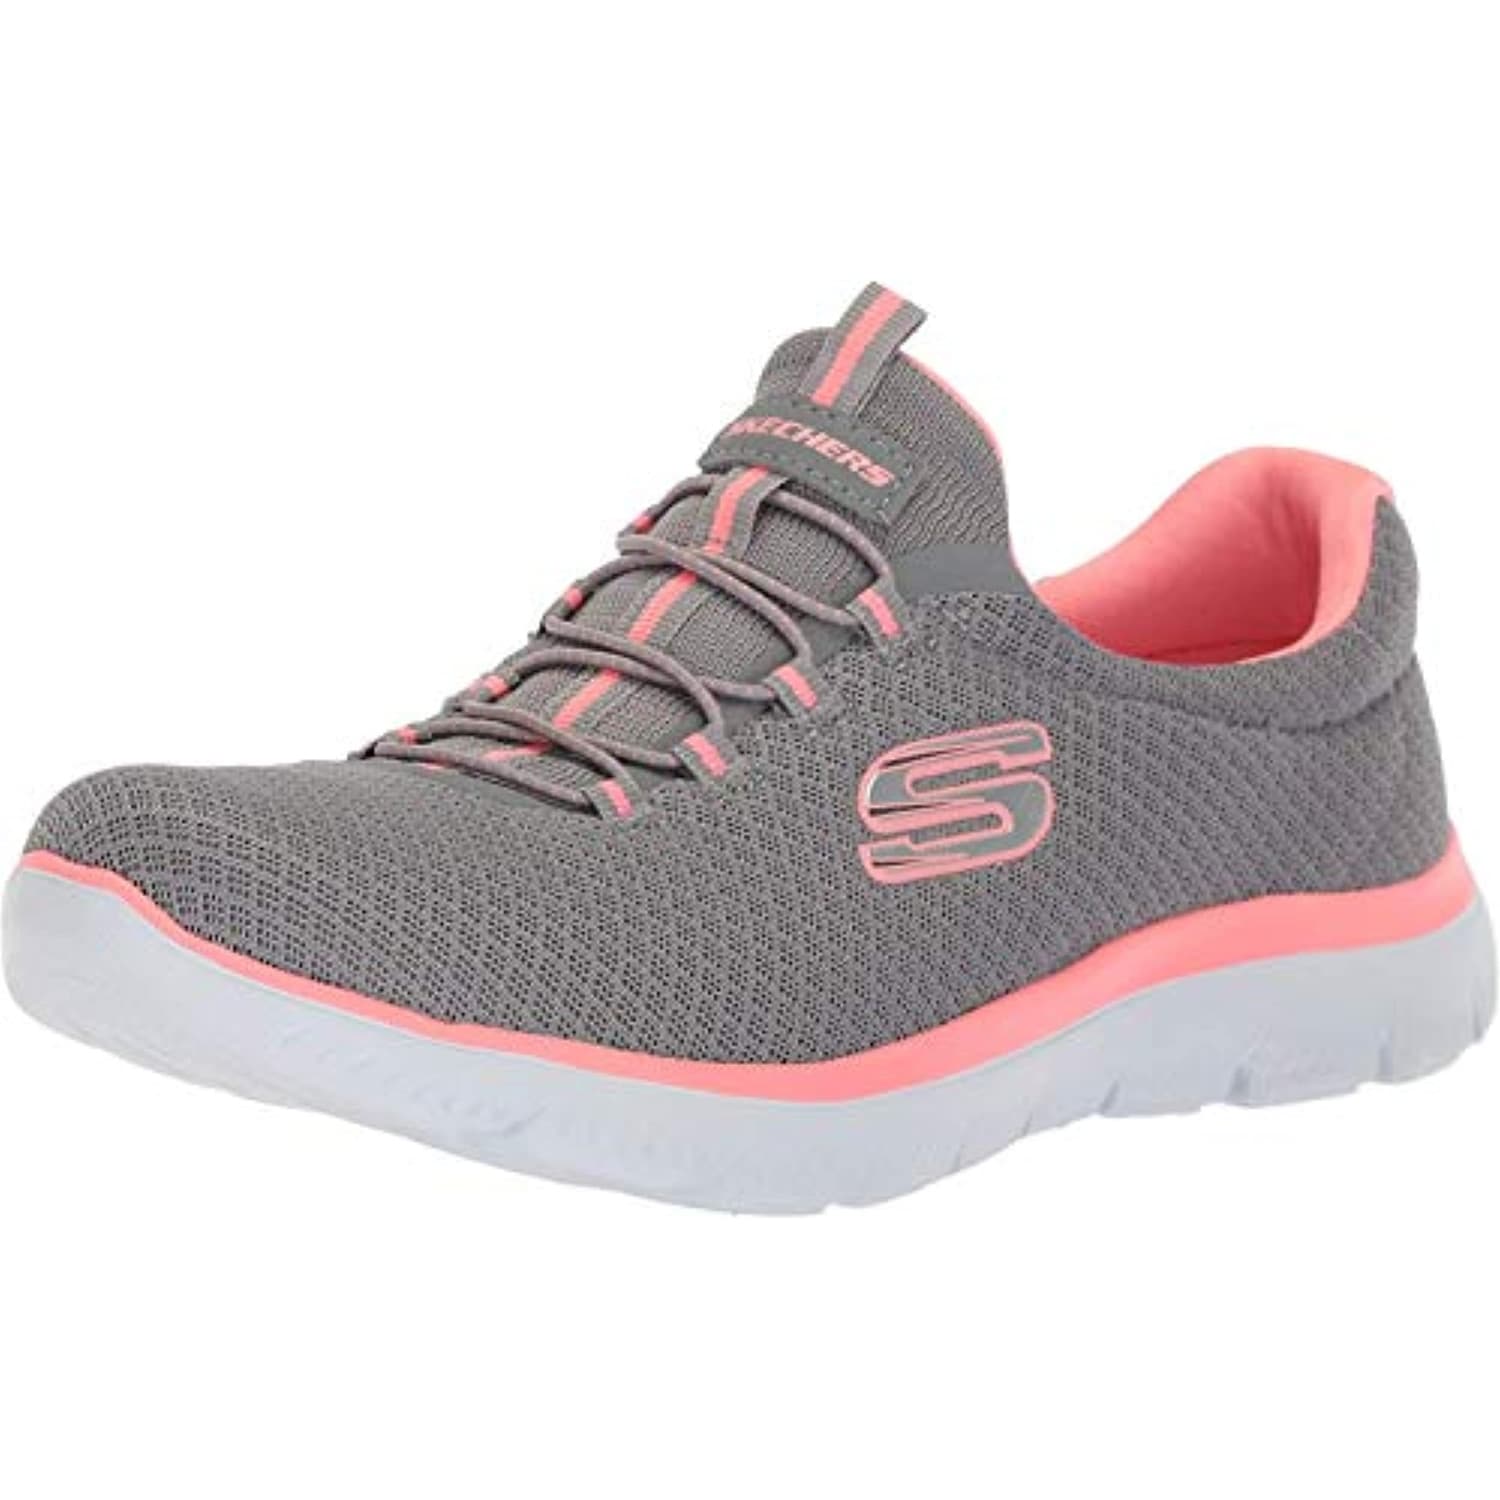 gray and pink skechers